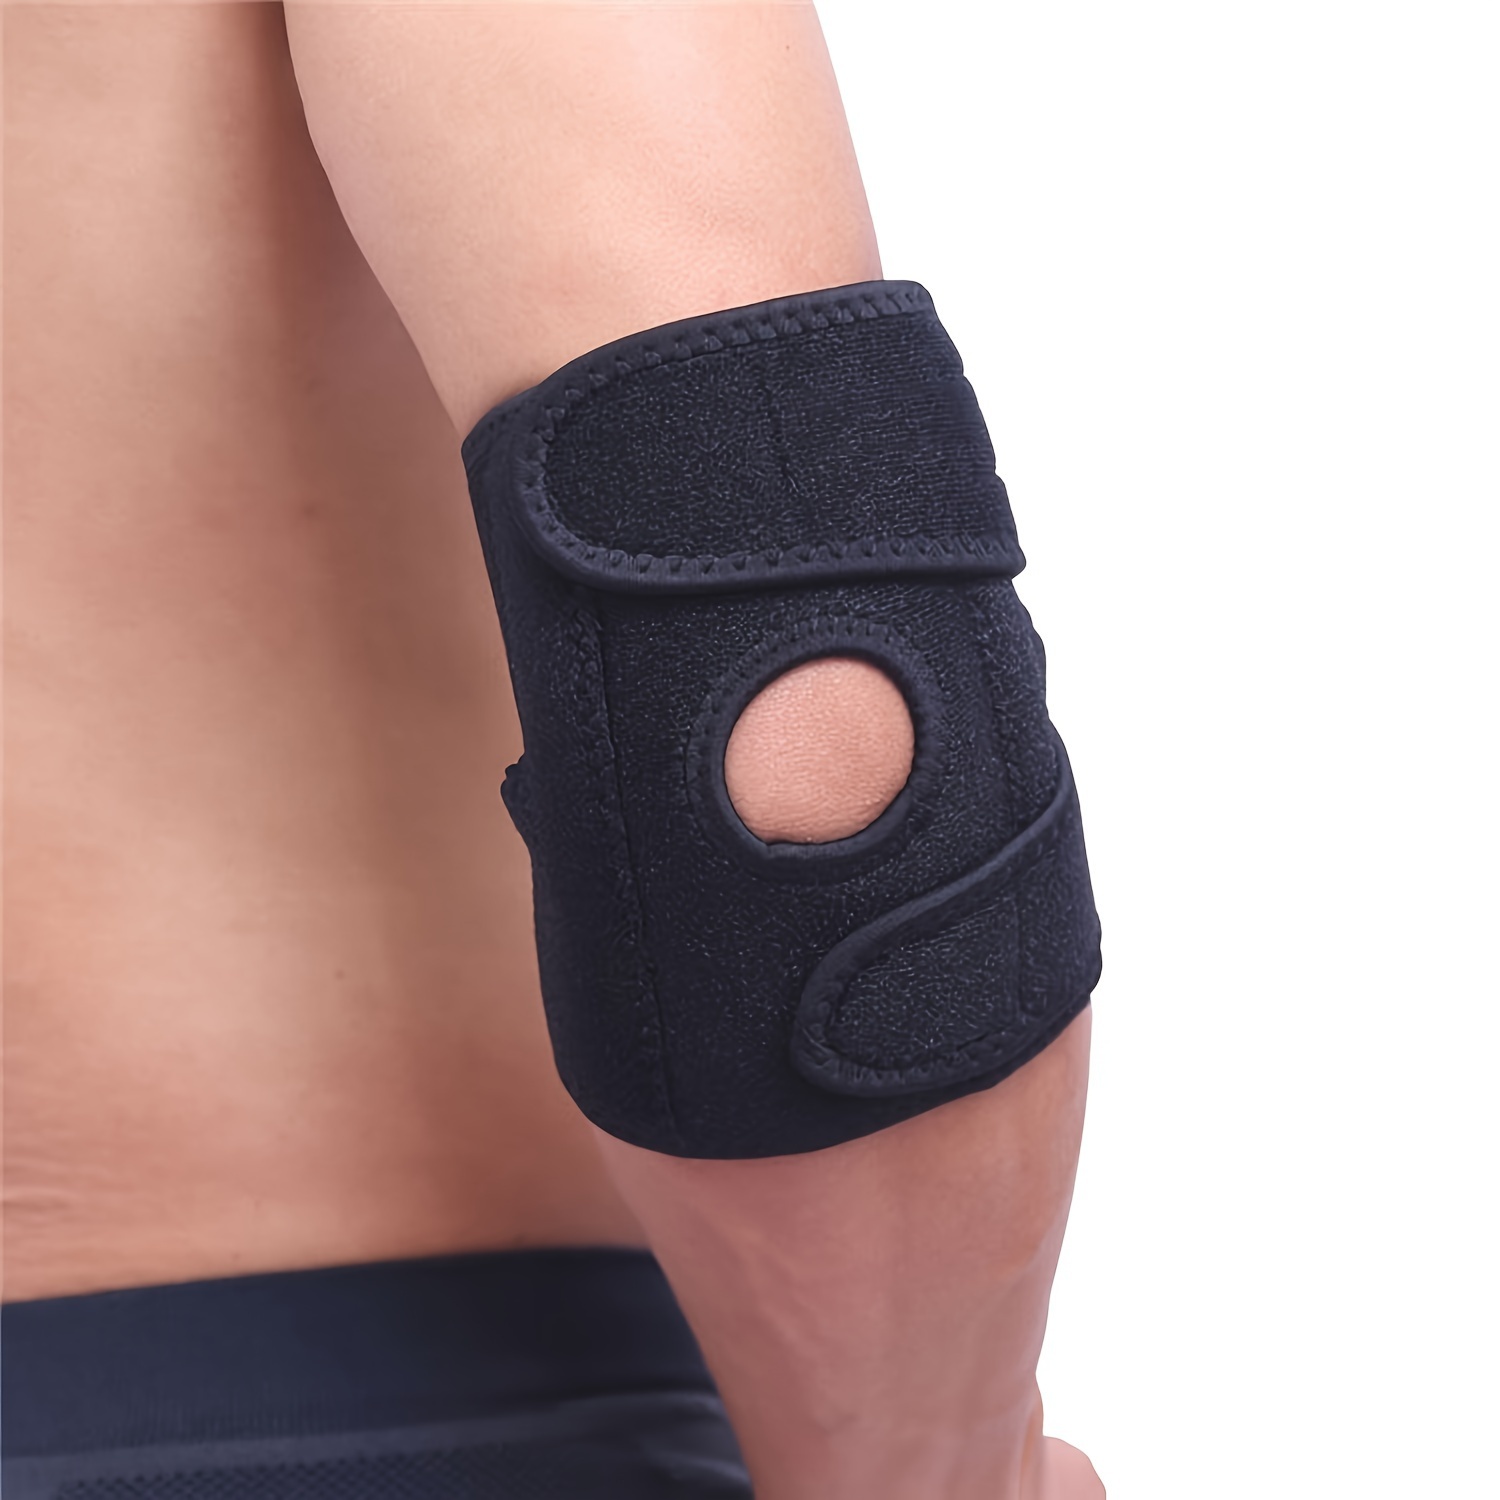 Elbow Support Strap, Omfortable Elbow Support Brace For Sports